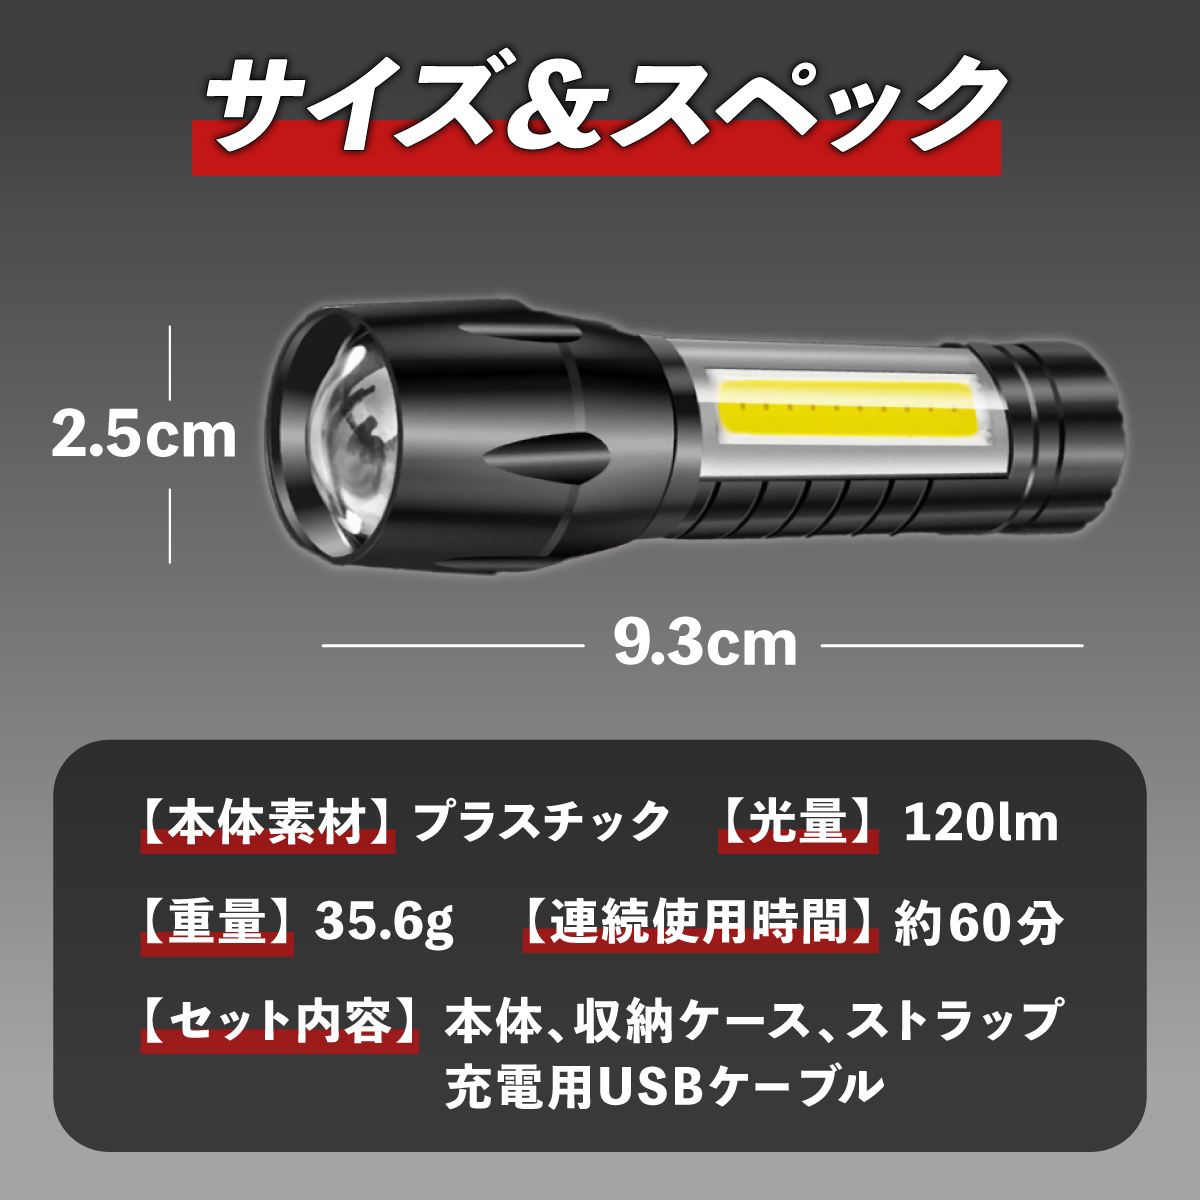 LED flashlight handy light rechargeable bright USB small size powerful small size for emergency outdoor 